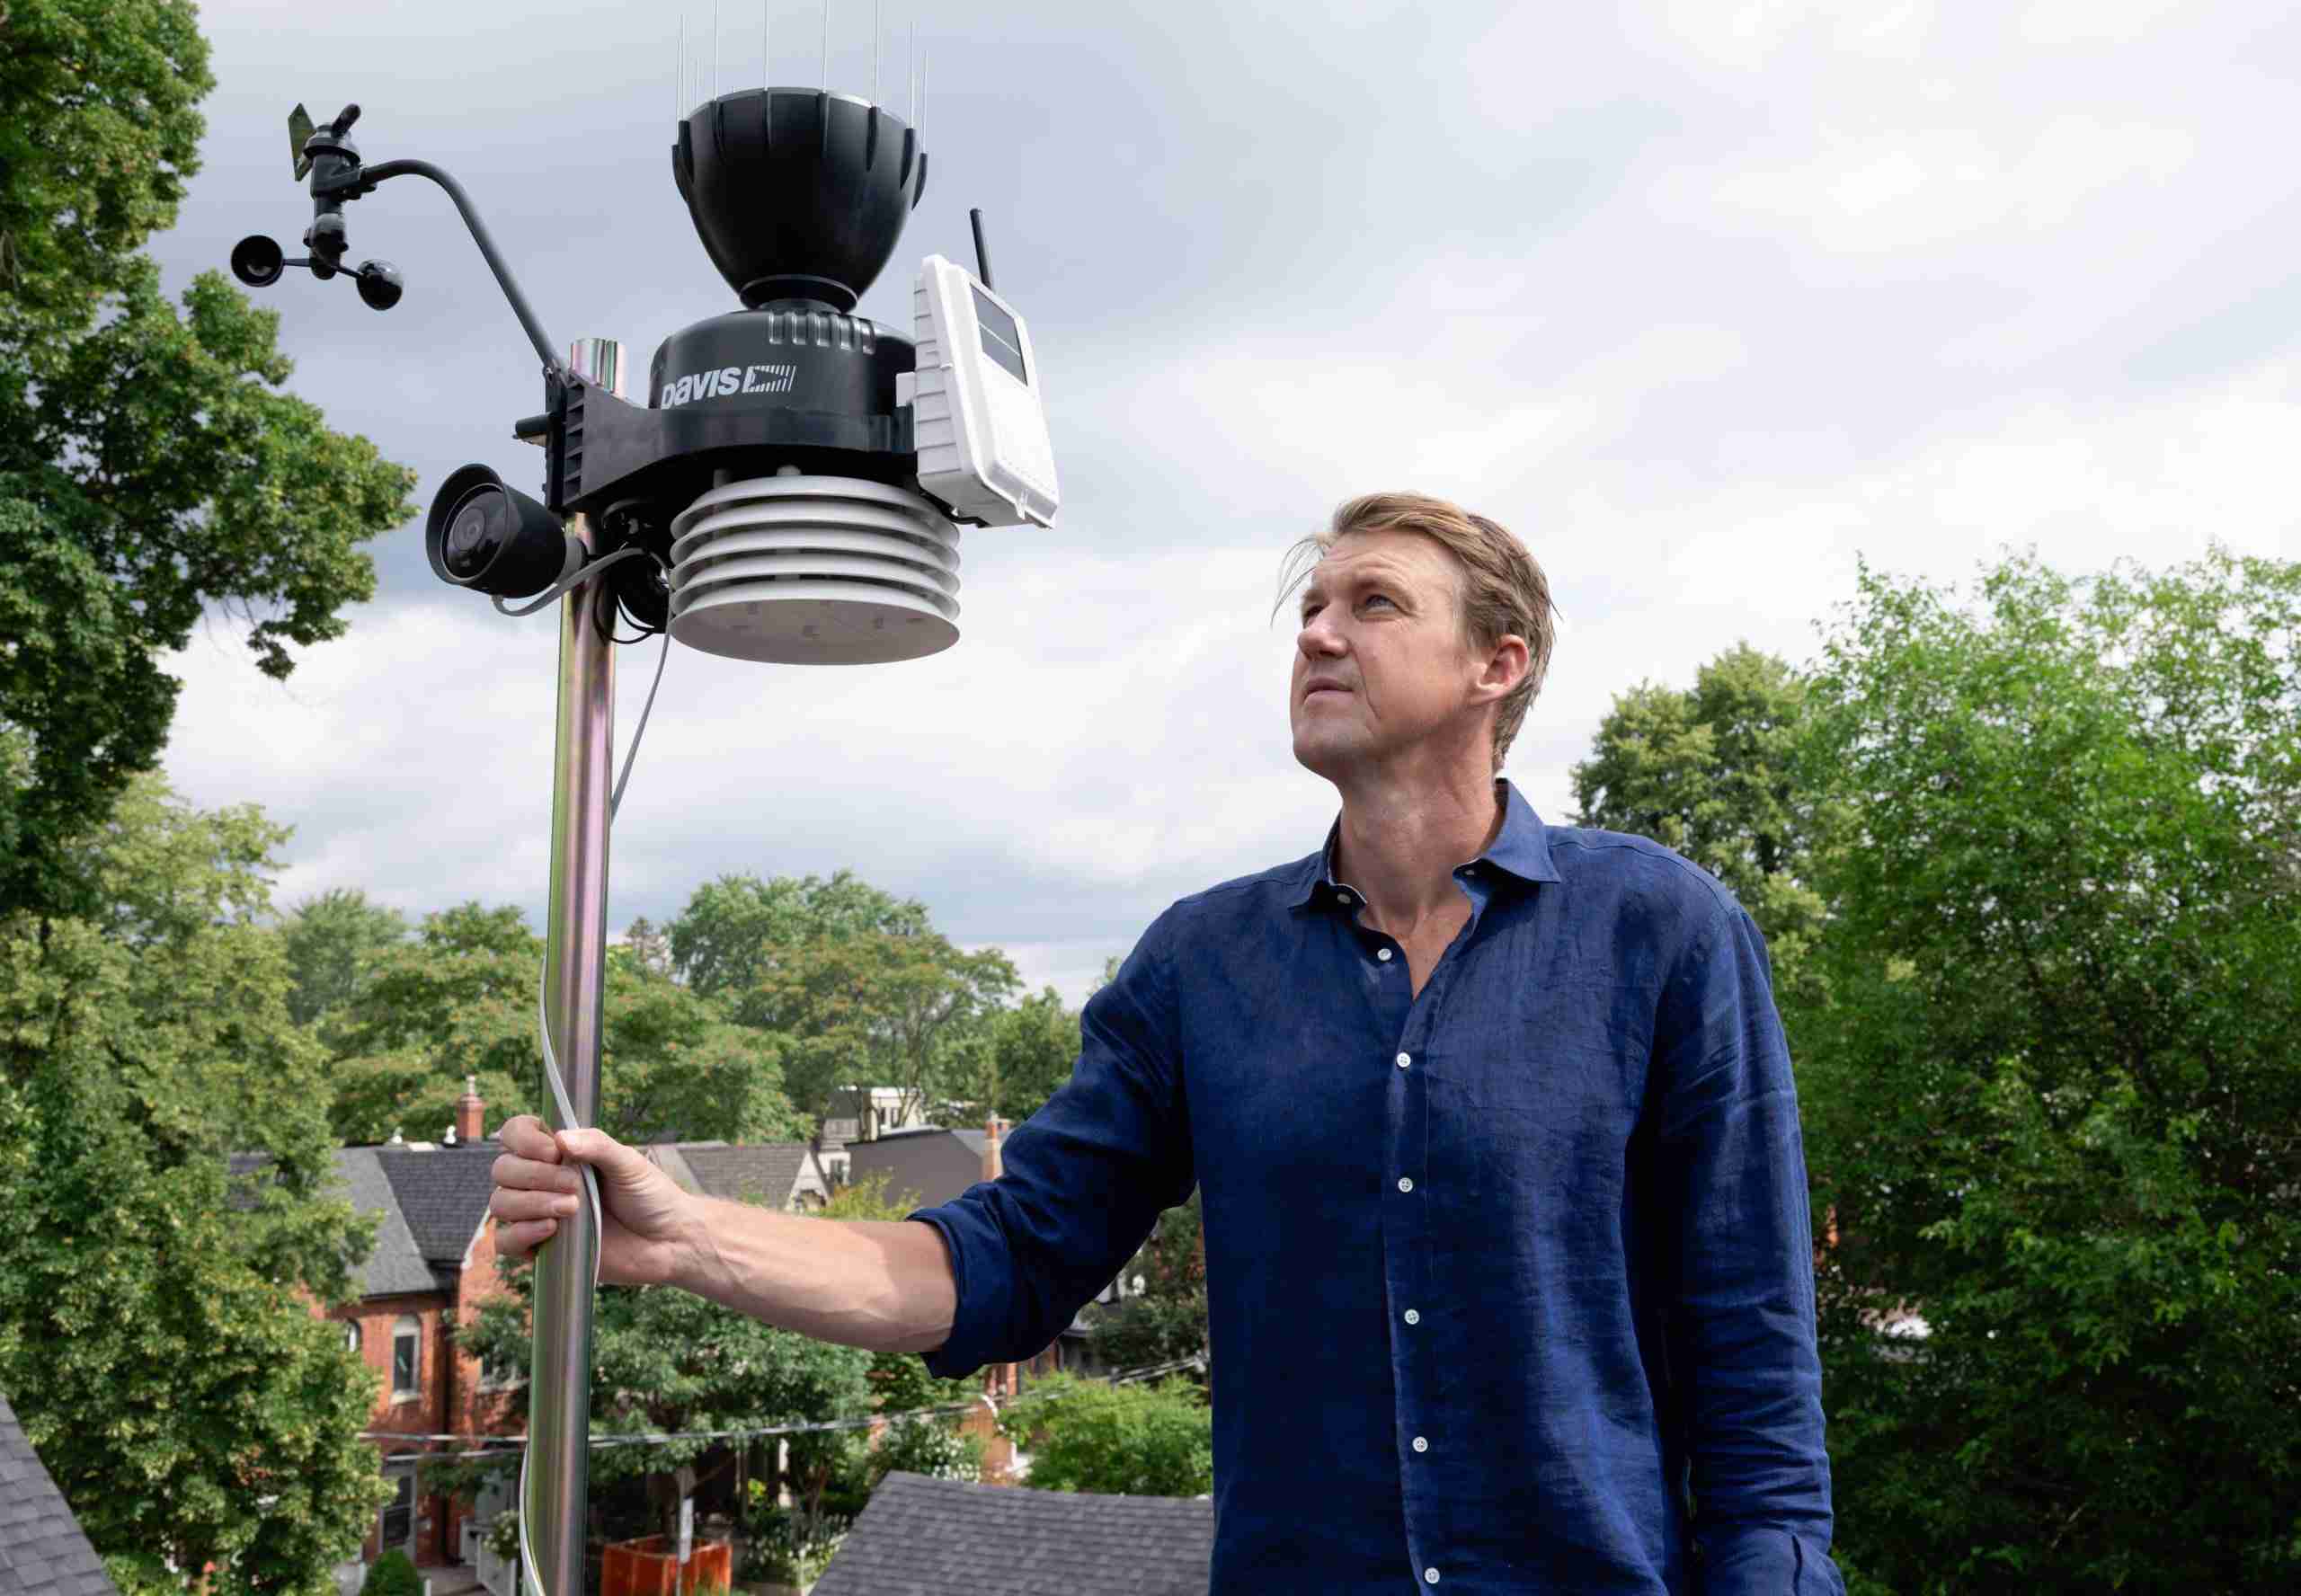 “There are hotter years ahead”: Global News meteorologist Anthony Farnell on why he installed an at-home weather station